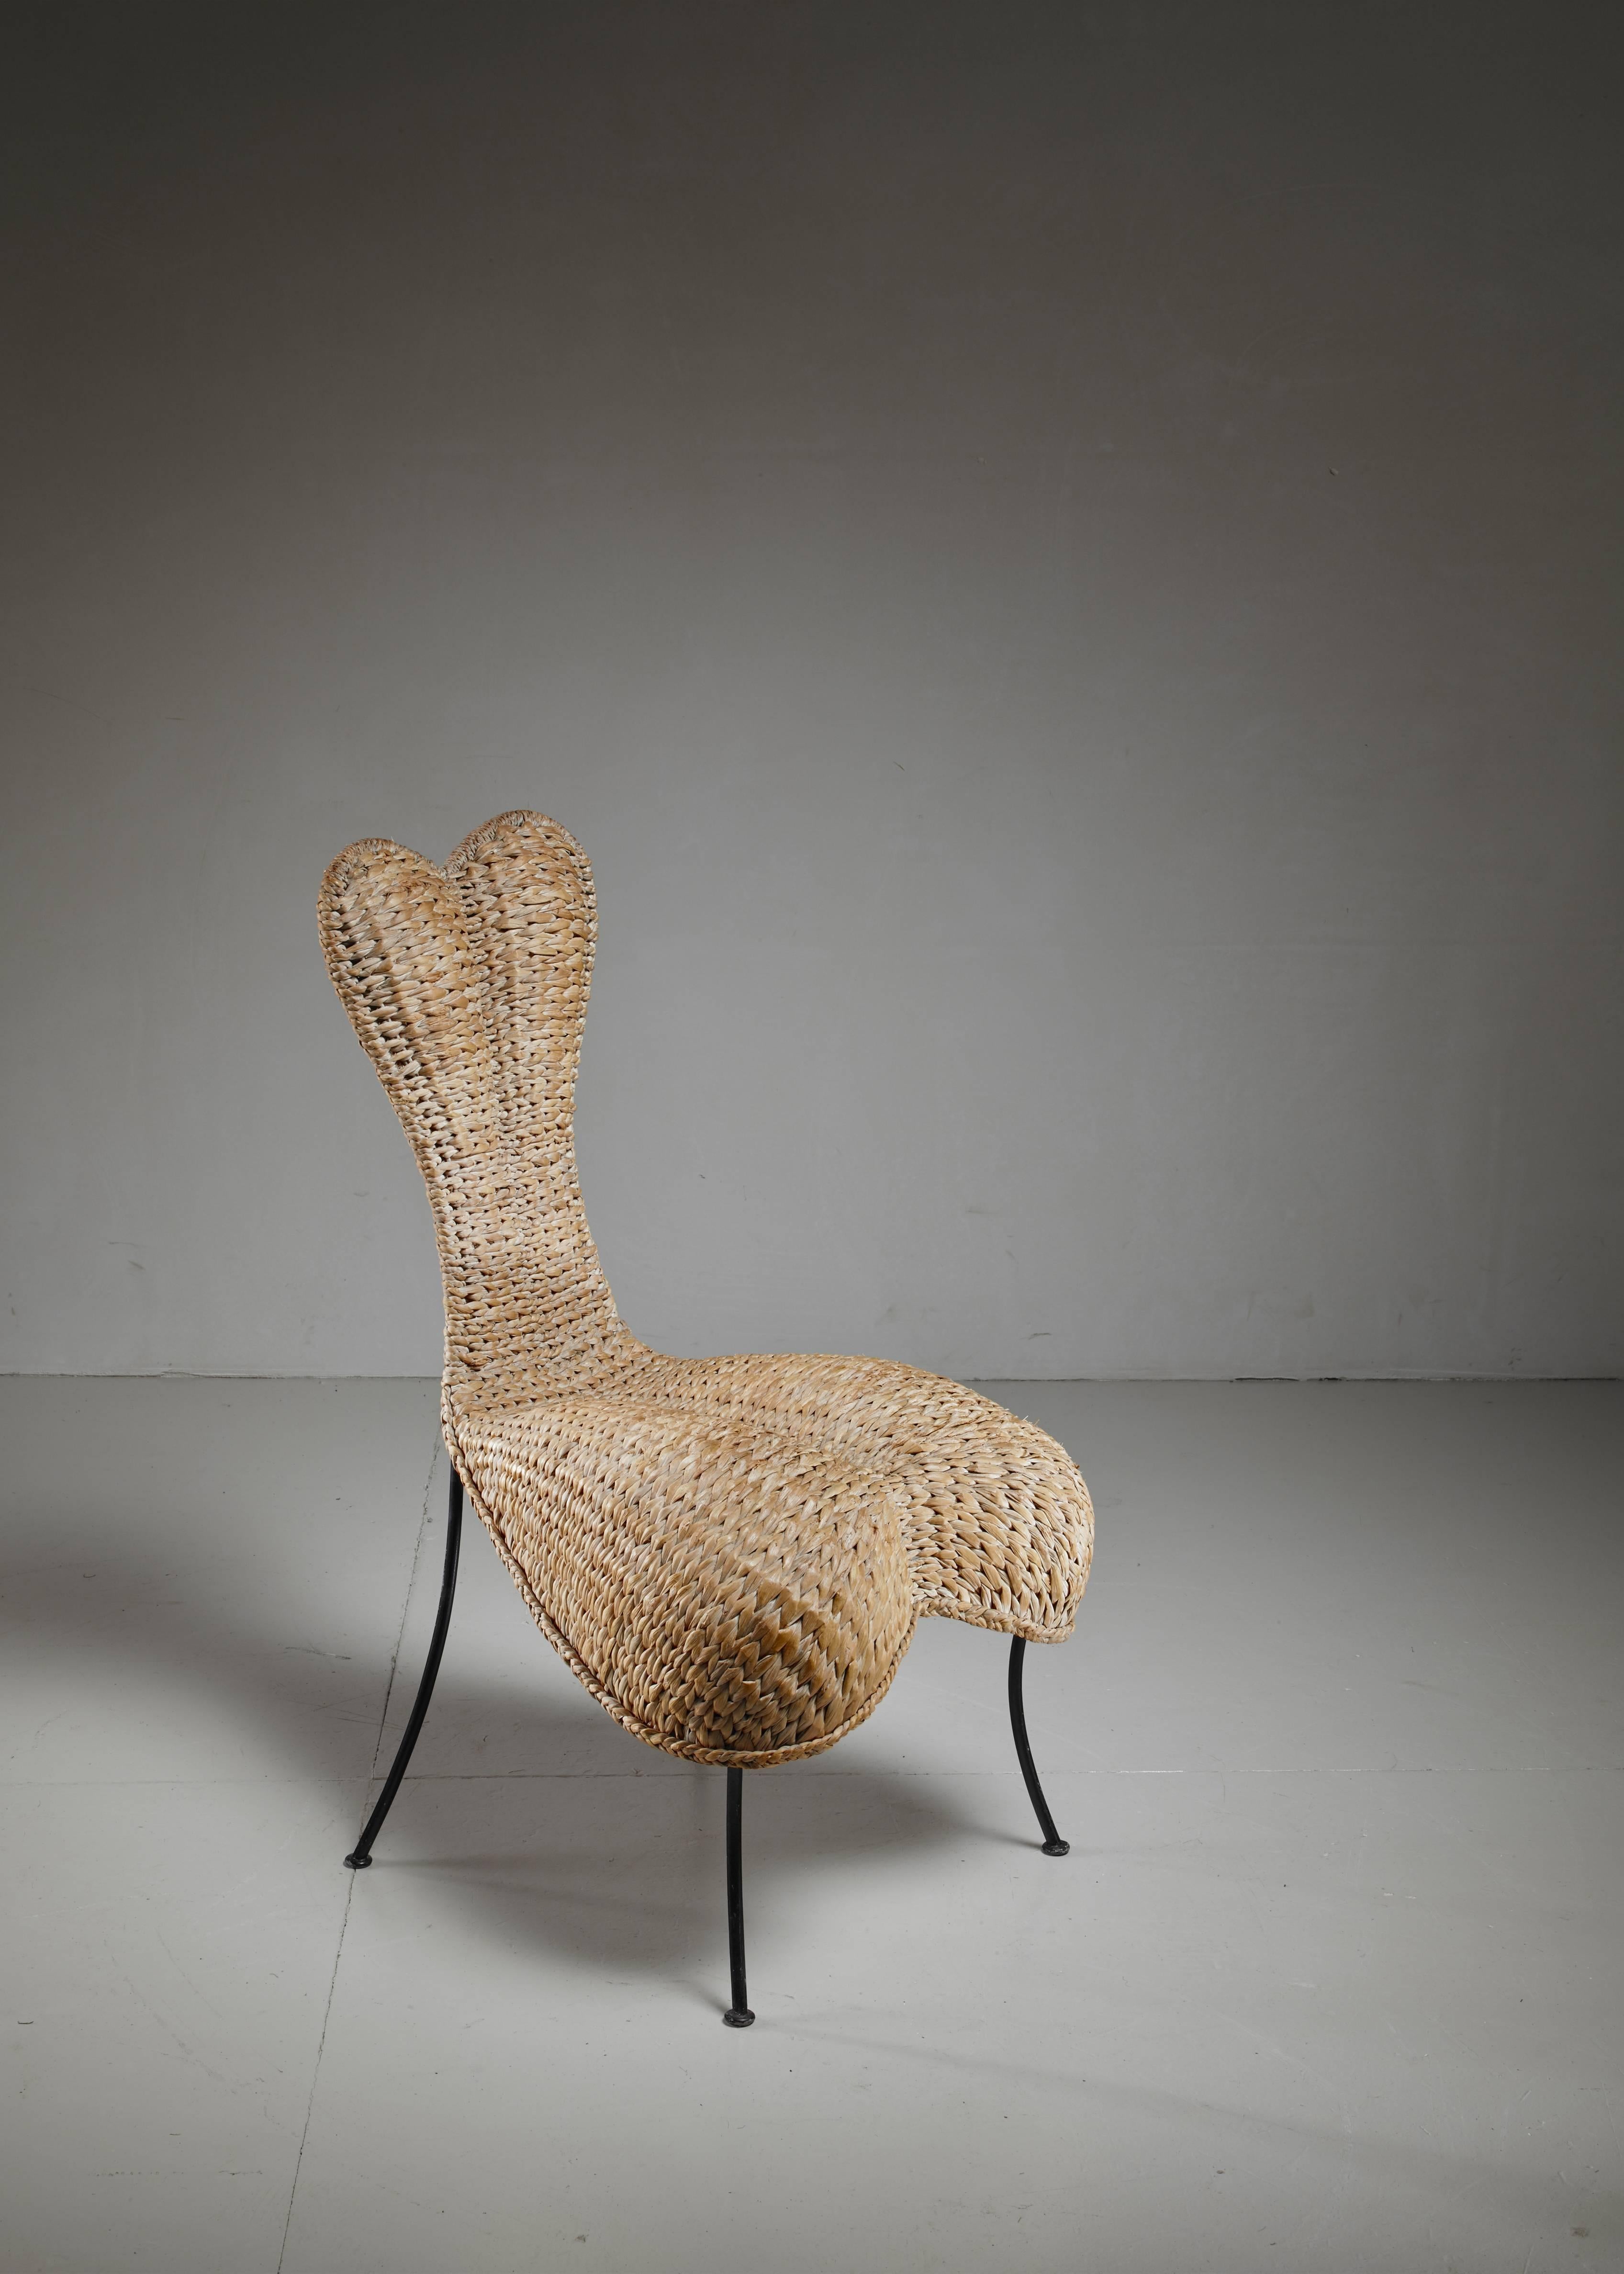 An anthropomorphic chair made of woven cane, standing on metal legs. Beautiful organic shaped object chair. 
 